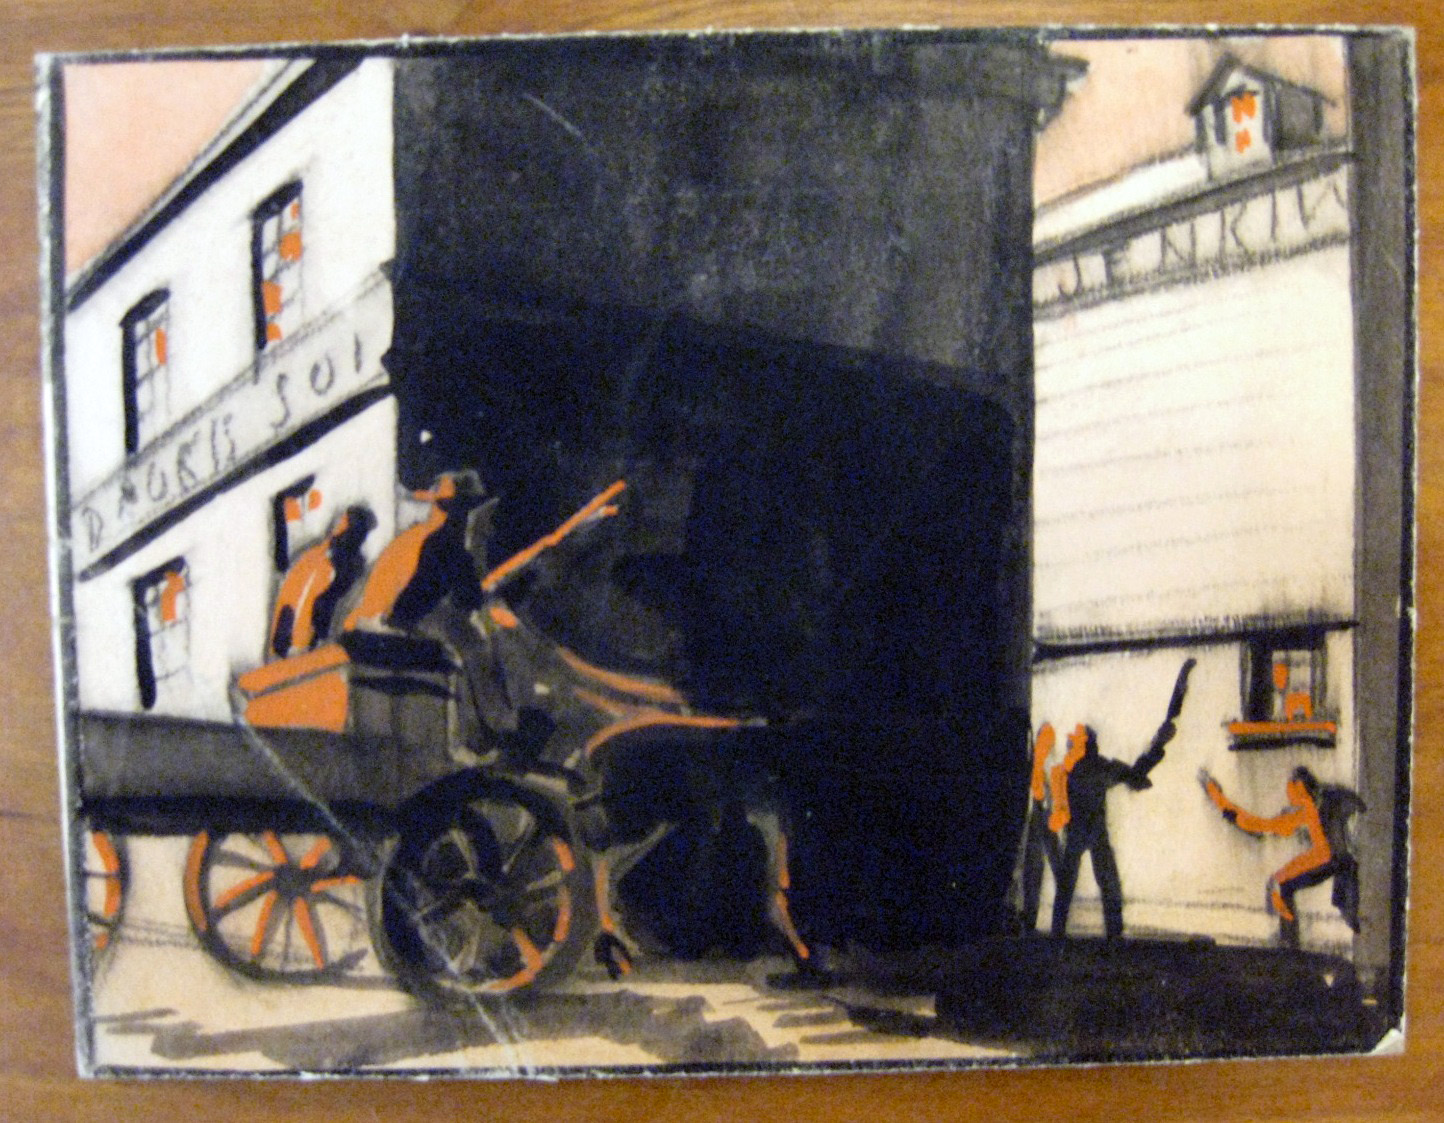 This storyboard depicts Scarlett and Rhett's journey out of Atlanta during the looting. We see Scarlett and Rhett in a wagon on the left side of the screen in the foreground. In the background buildings stand with broken windows, with the cracked glass conveyed by orange paint, which also represents the fire's glare on Scarlett and Rhett's back.  Looters linger in the background on the right of the storyboard.